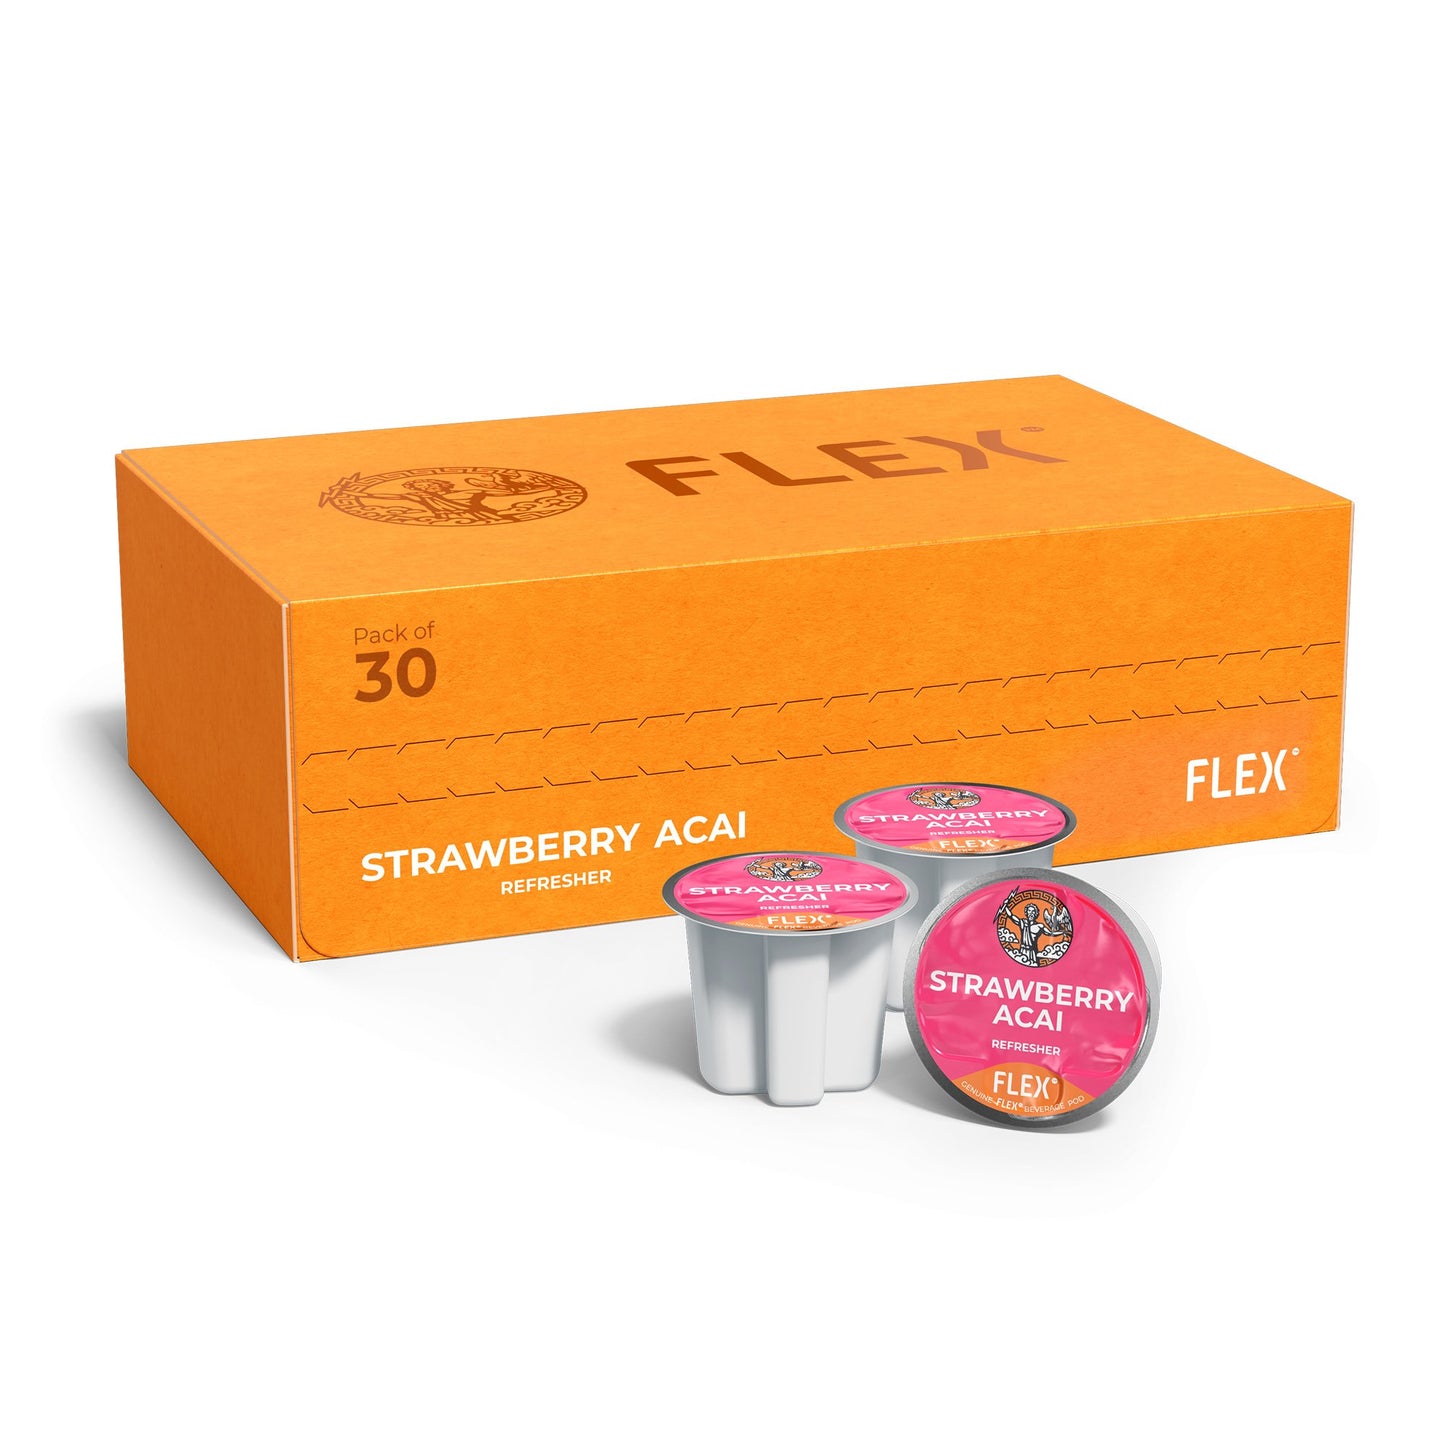 box for a pack of 30 FLEXFUEL™ Strawberry Acai refresher pods, featuring a vibrant pink color scheme with a classic Greek motif and an illustration of Zeus with a thunderbolt and an eagle, emphasizing energy and vitality.